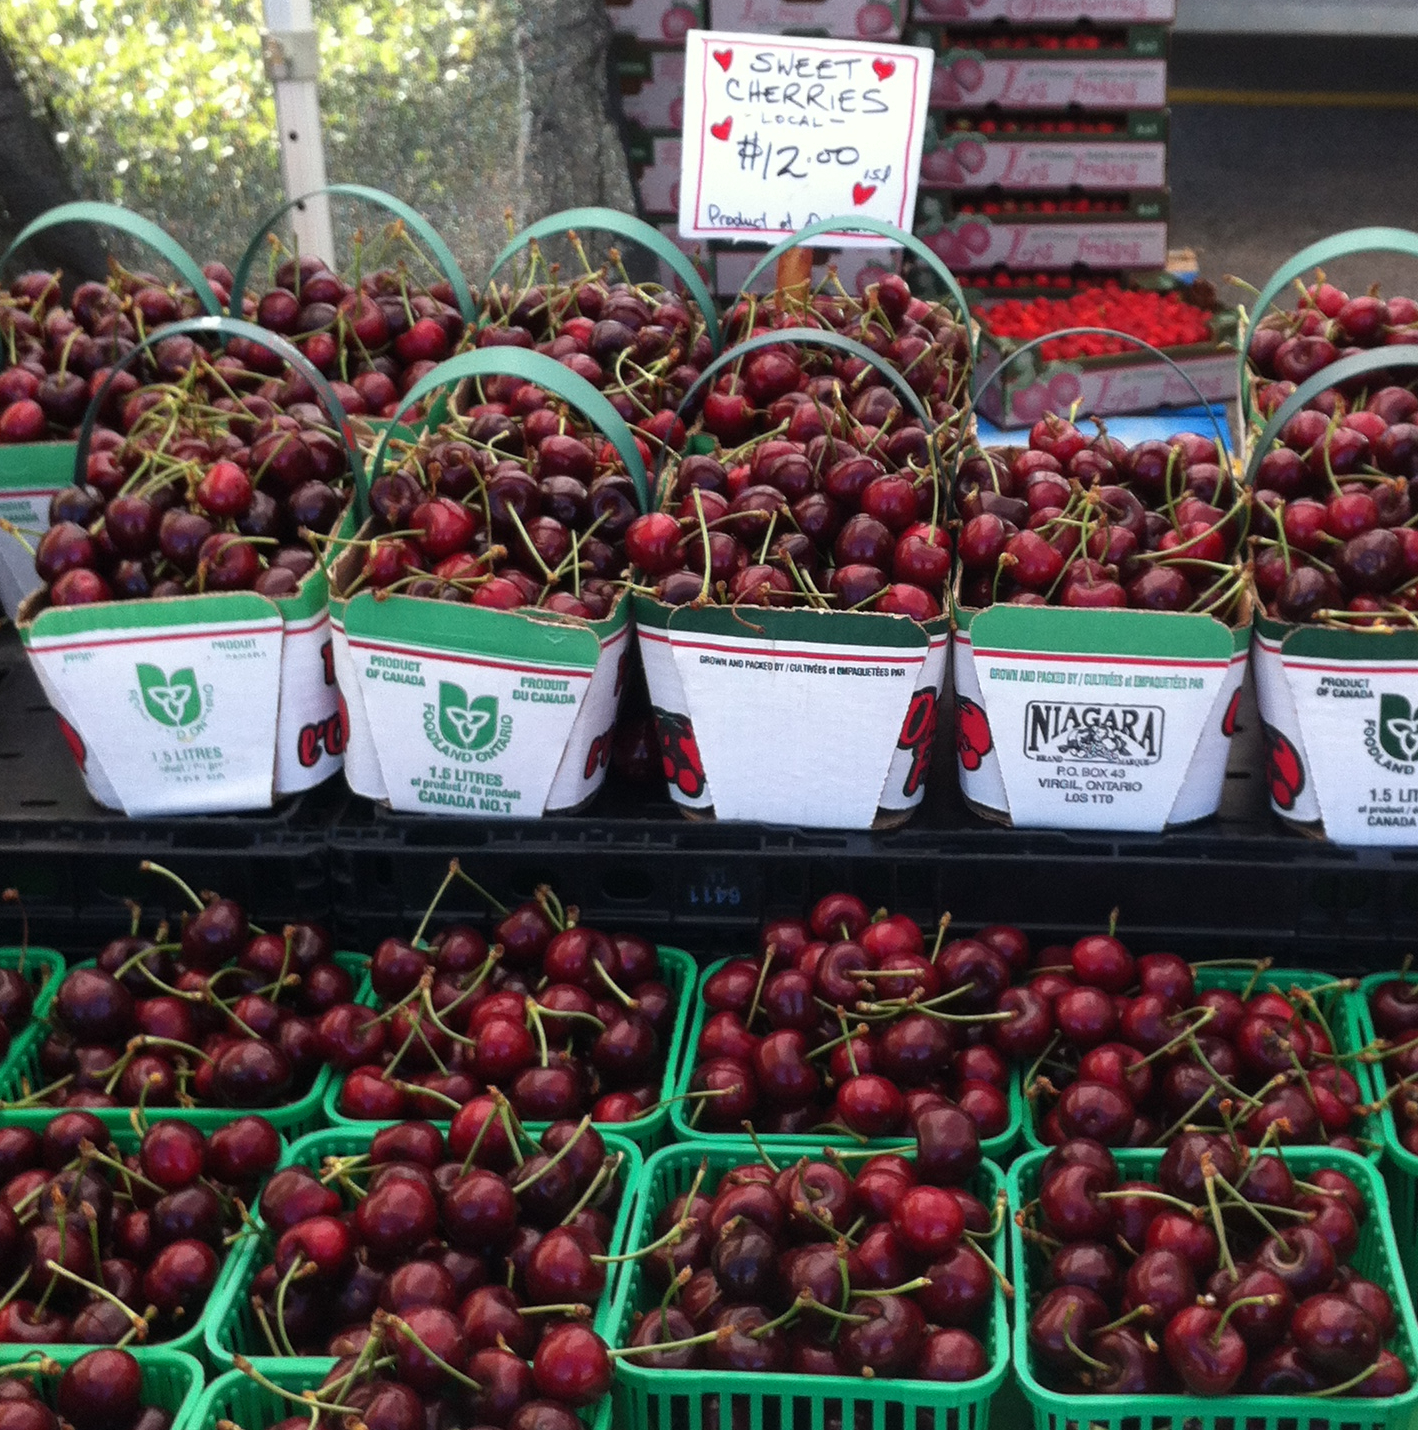 Cherries from Roberts Farms | Michele Bogle